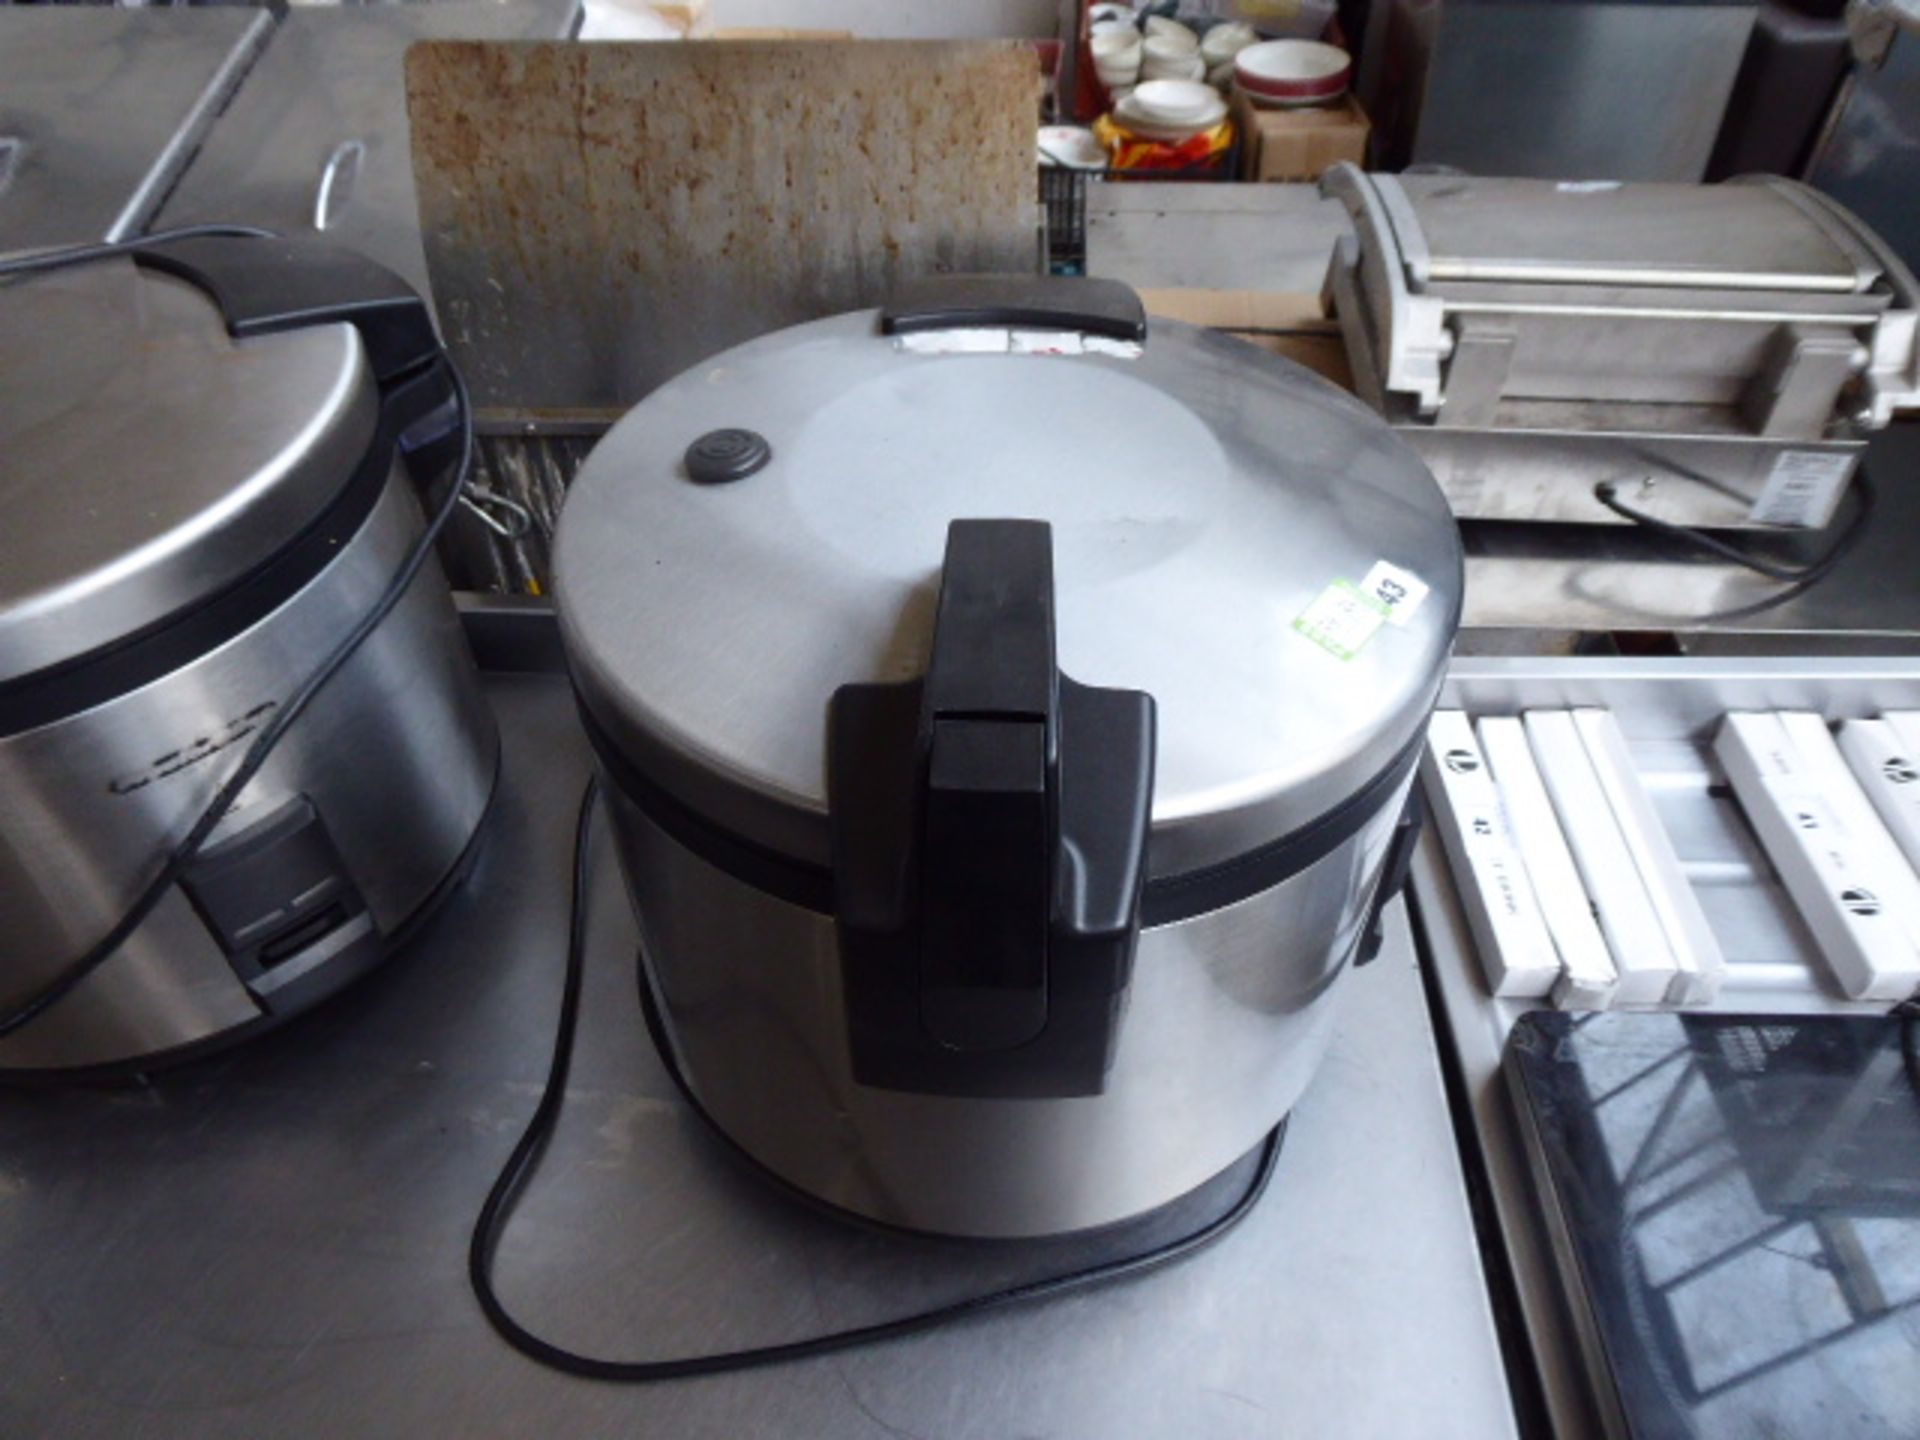 (TN22) - Proctor Silex commercial rice cooker